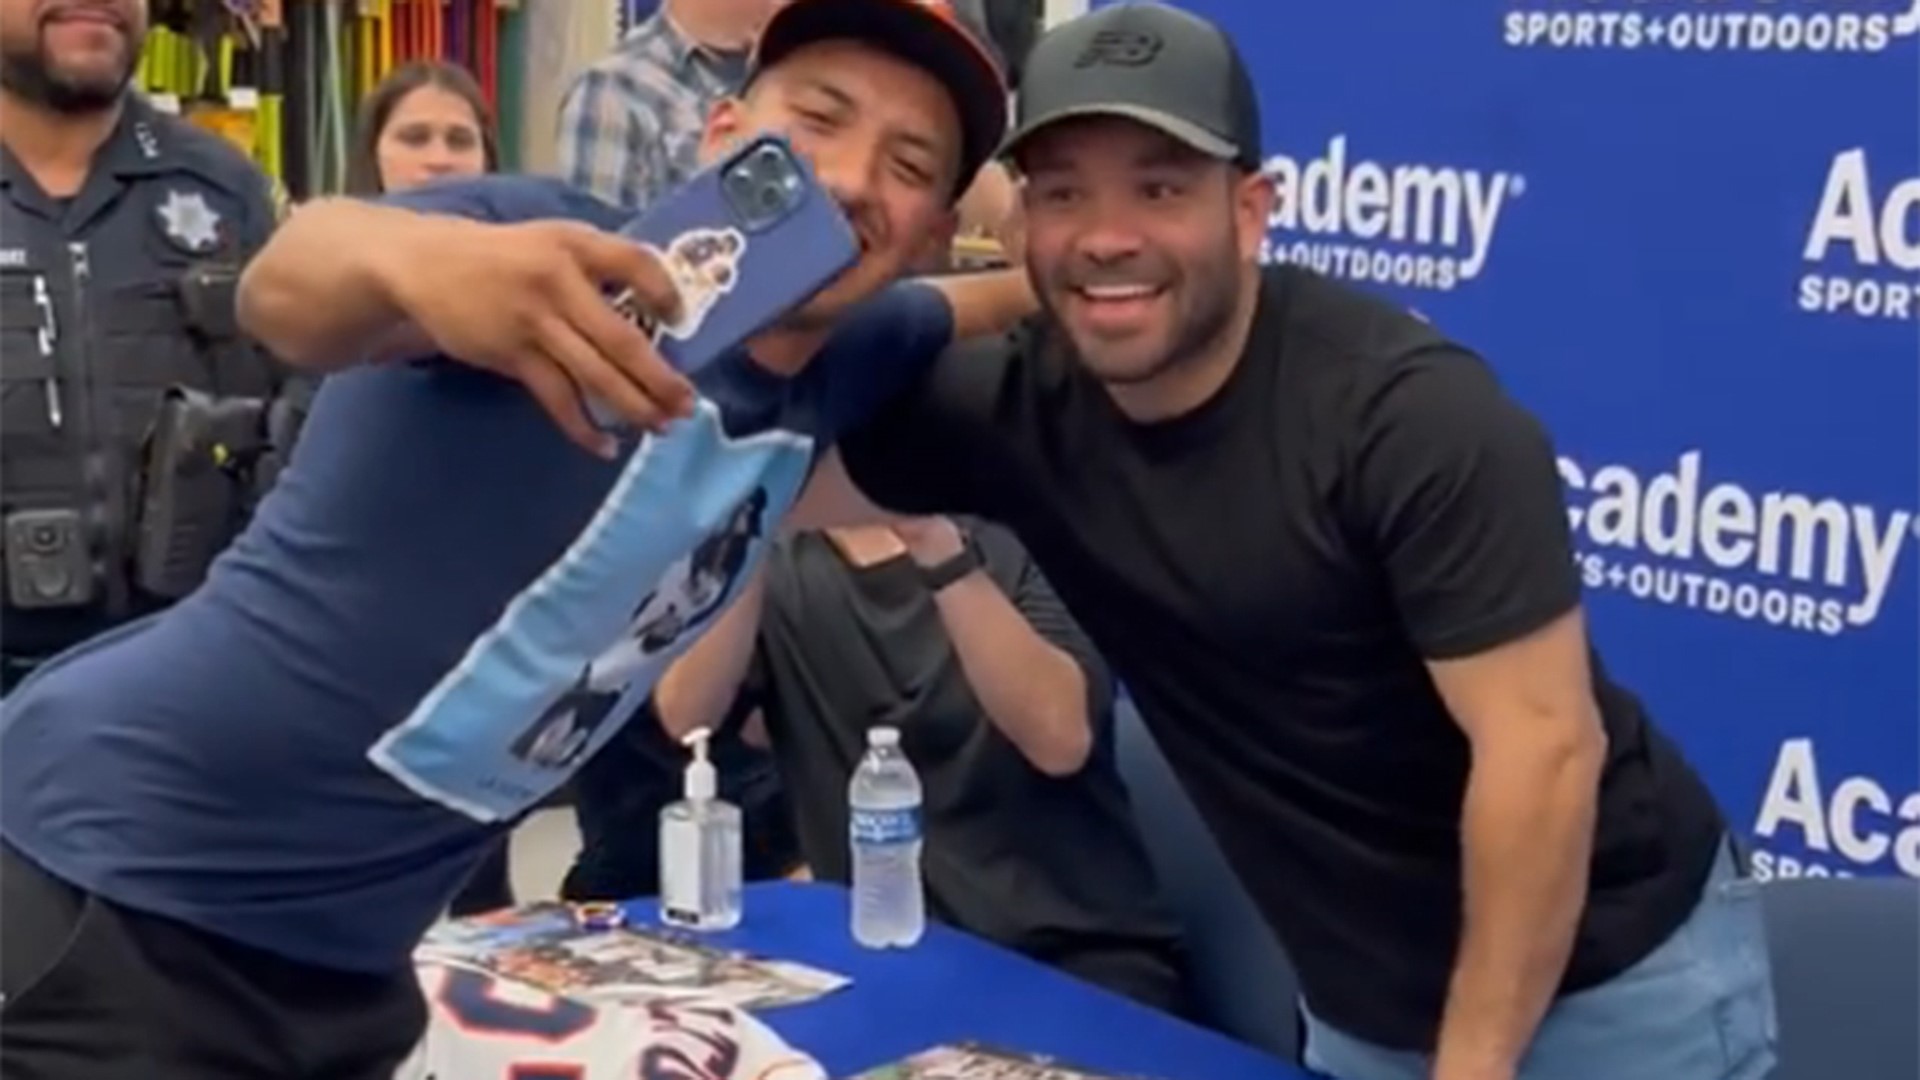 Jose Altuve was signing autographs for fans on Thursday. One fan who came in was the same guy who ran onto the field for a selfie with Altuve during the ALCS.